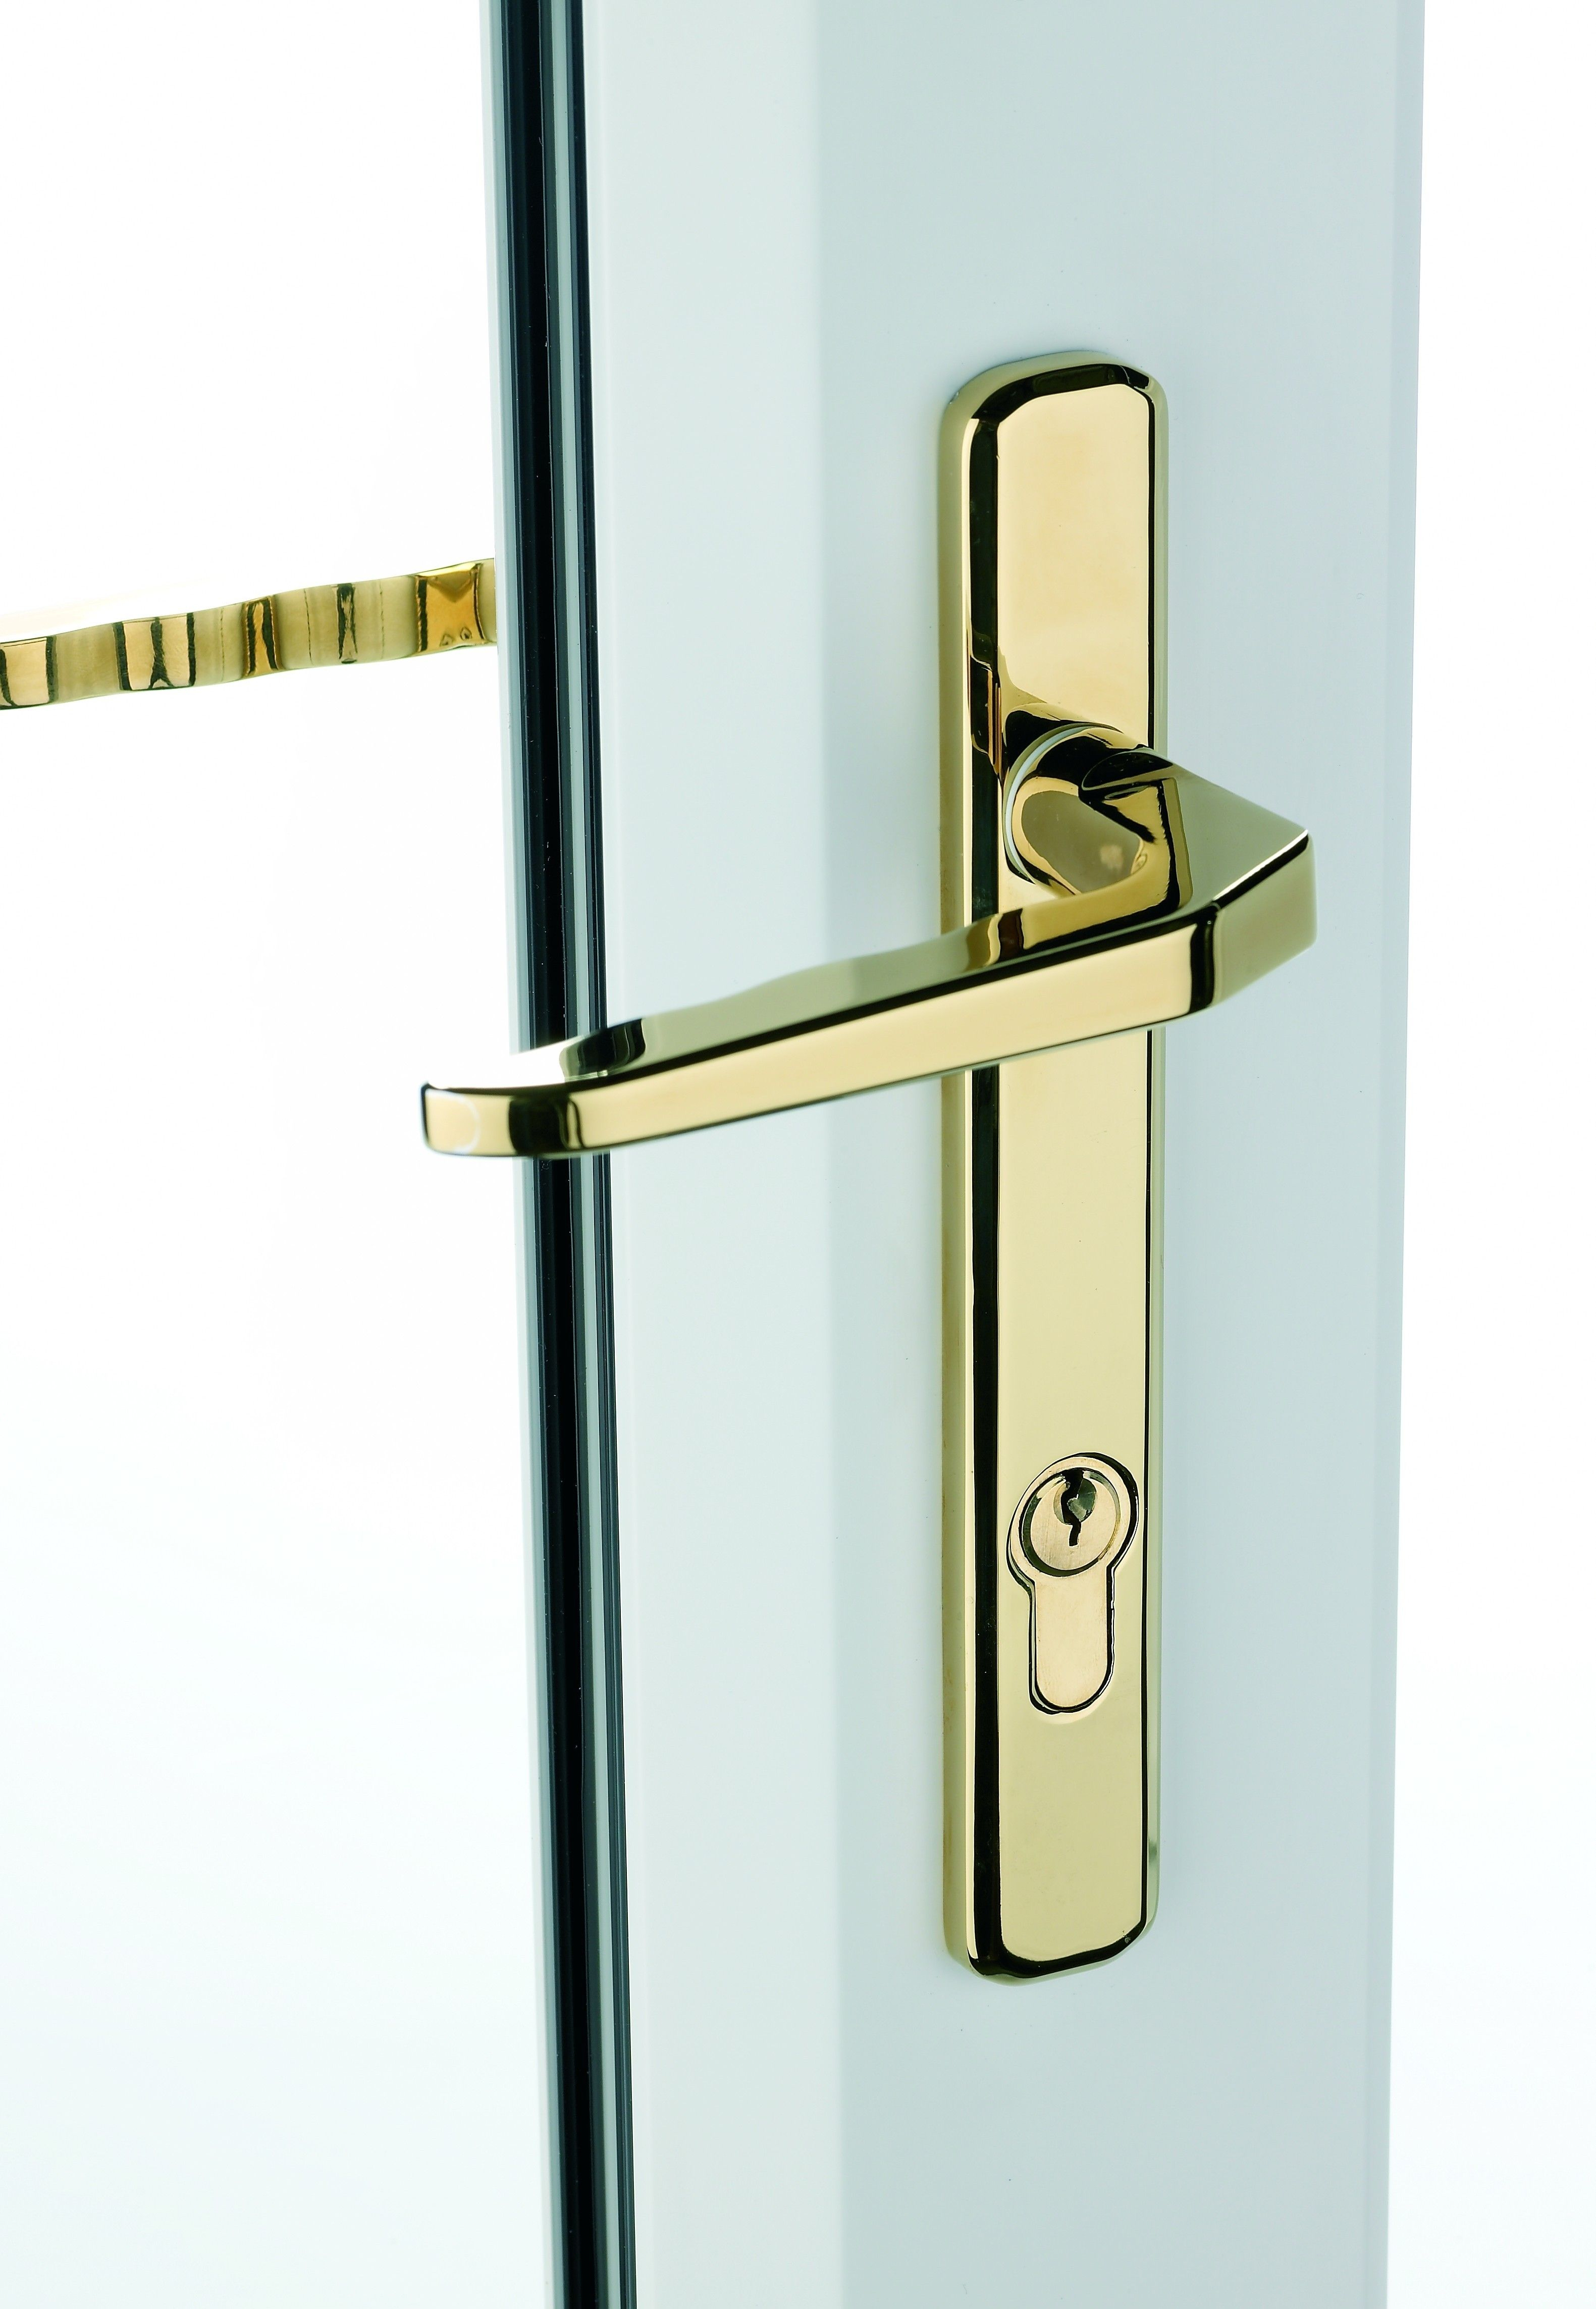 Chic Locks For Bedroom Doors At Door Knob Spindle Stuck intended for dimensions 3162 X 4574